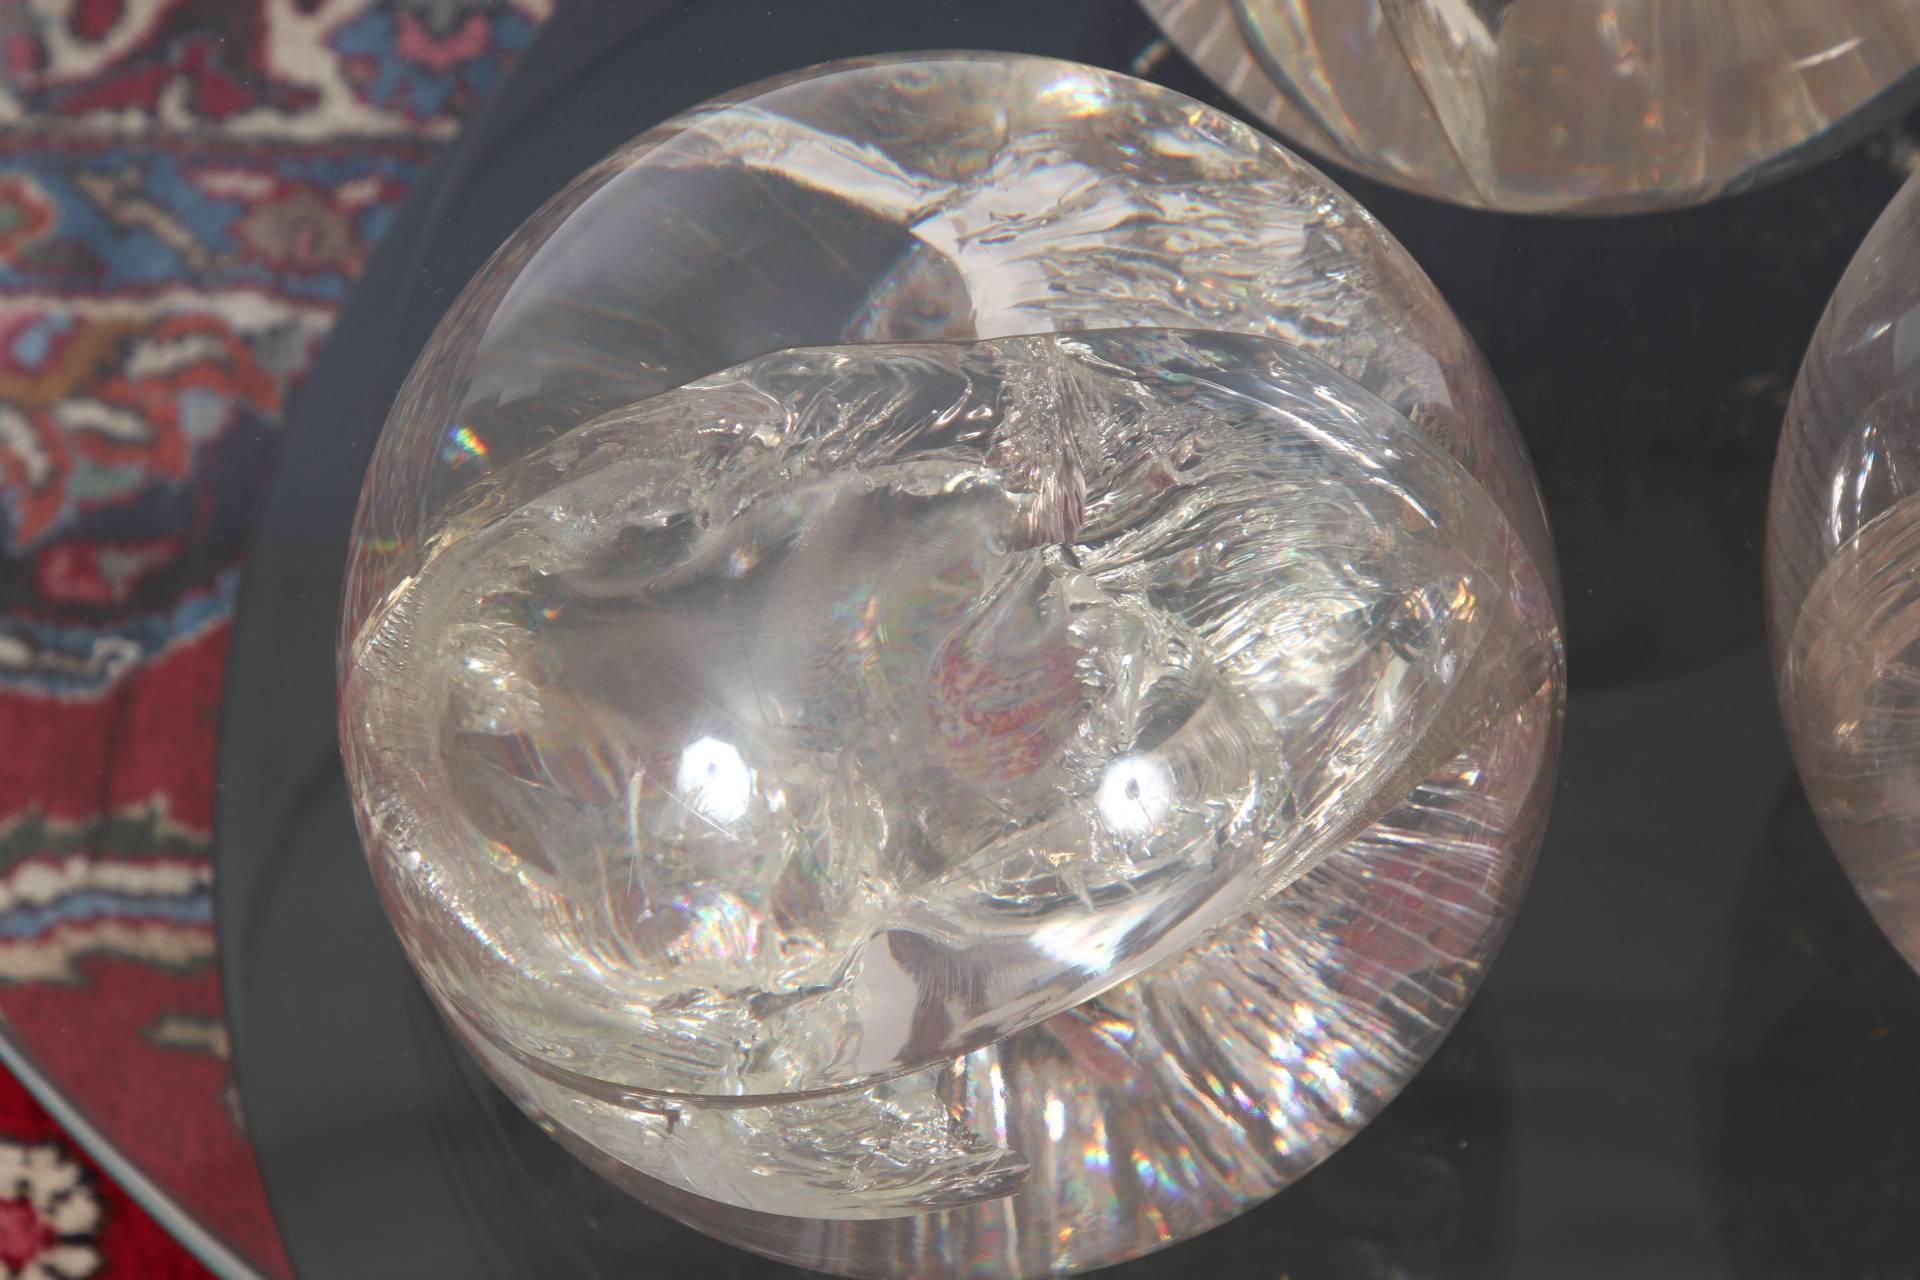 Three internally cracked Lucite spheres screw mounted on a round two-tiered back lacquer base. With a round glass top.
Condition: some scrapes to the base.